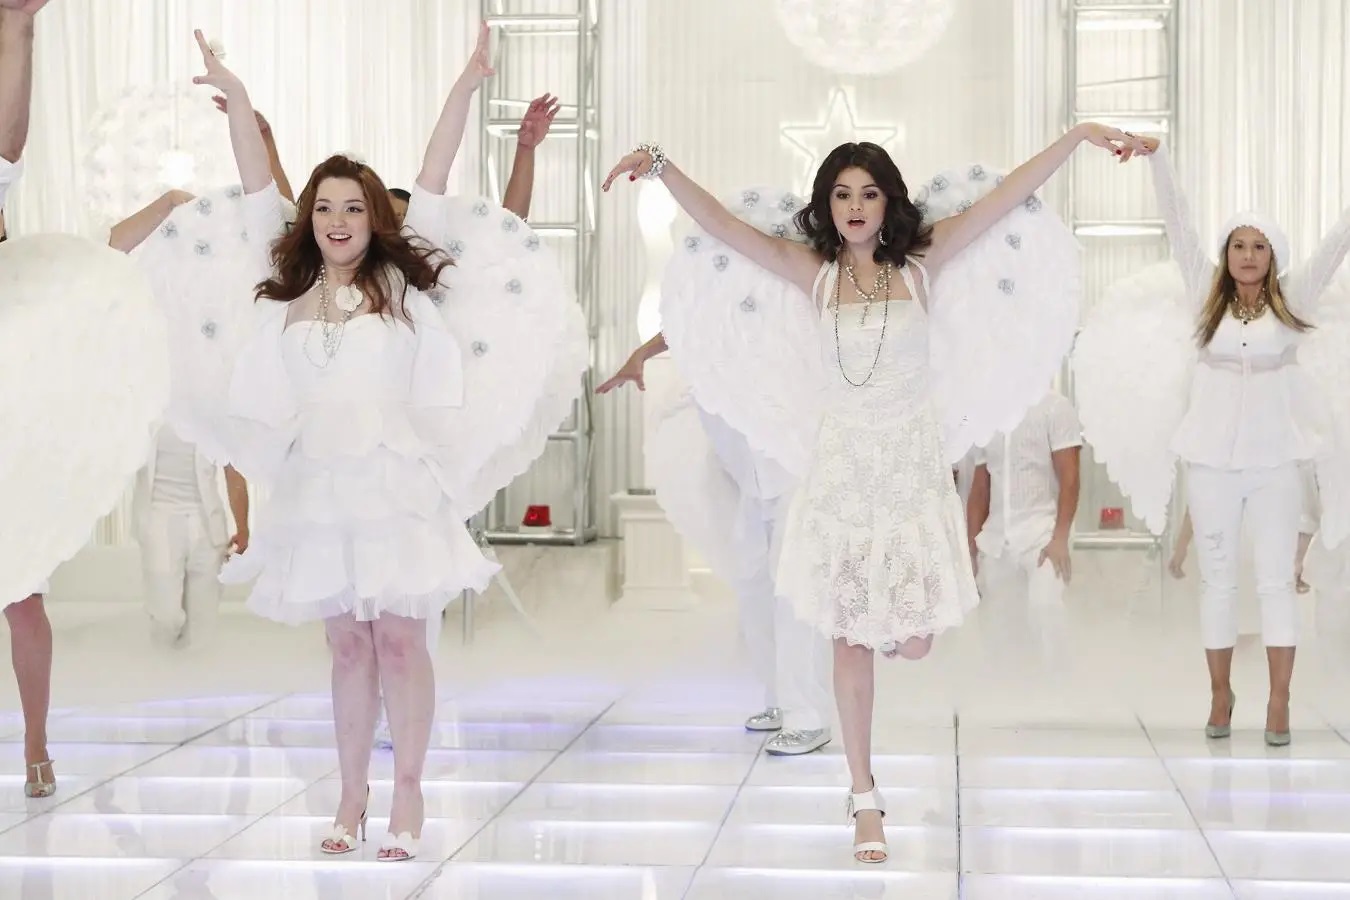 Wizards of waverly place dancing with angels